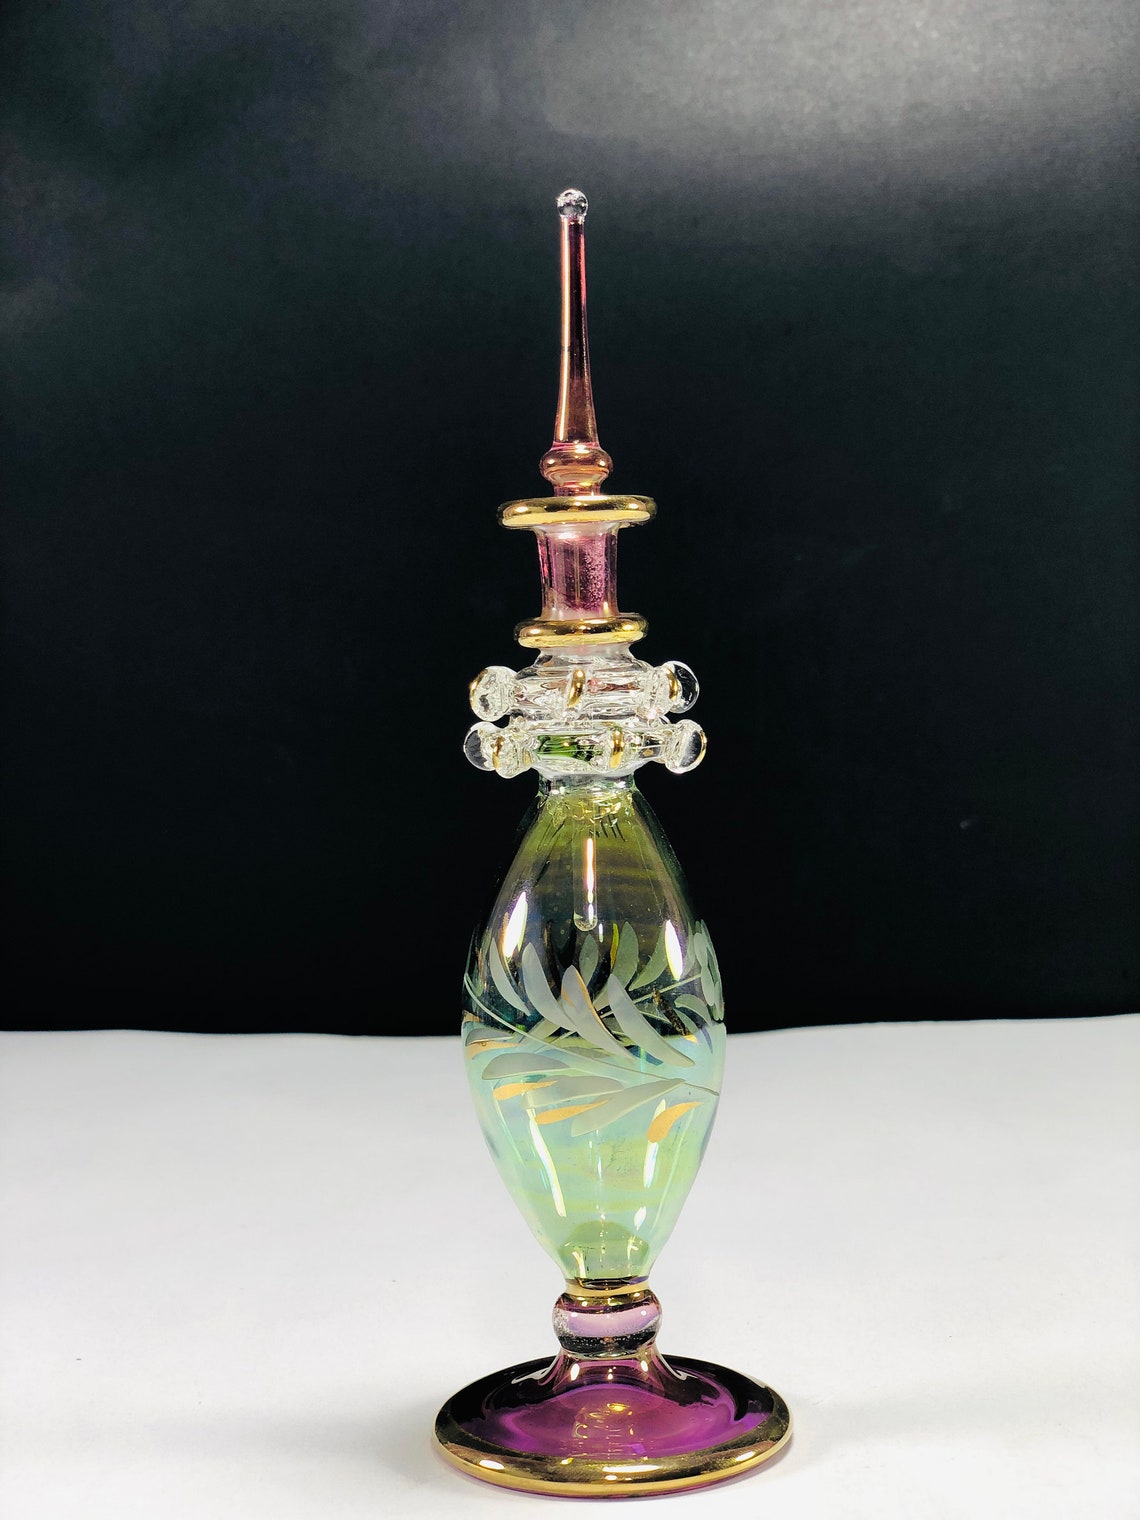 Egyptian Hand Blown Glass Perfume Bottles Decorative By 14k Etsy